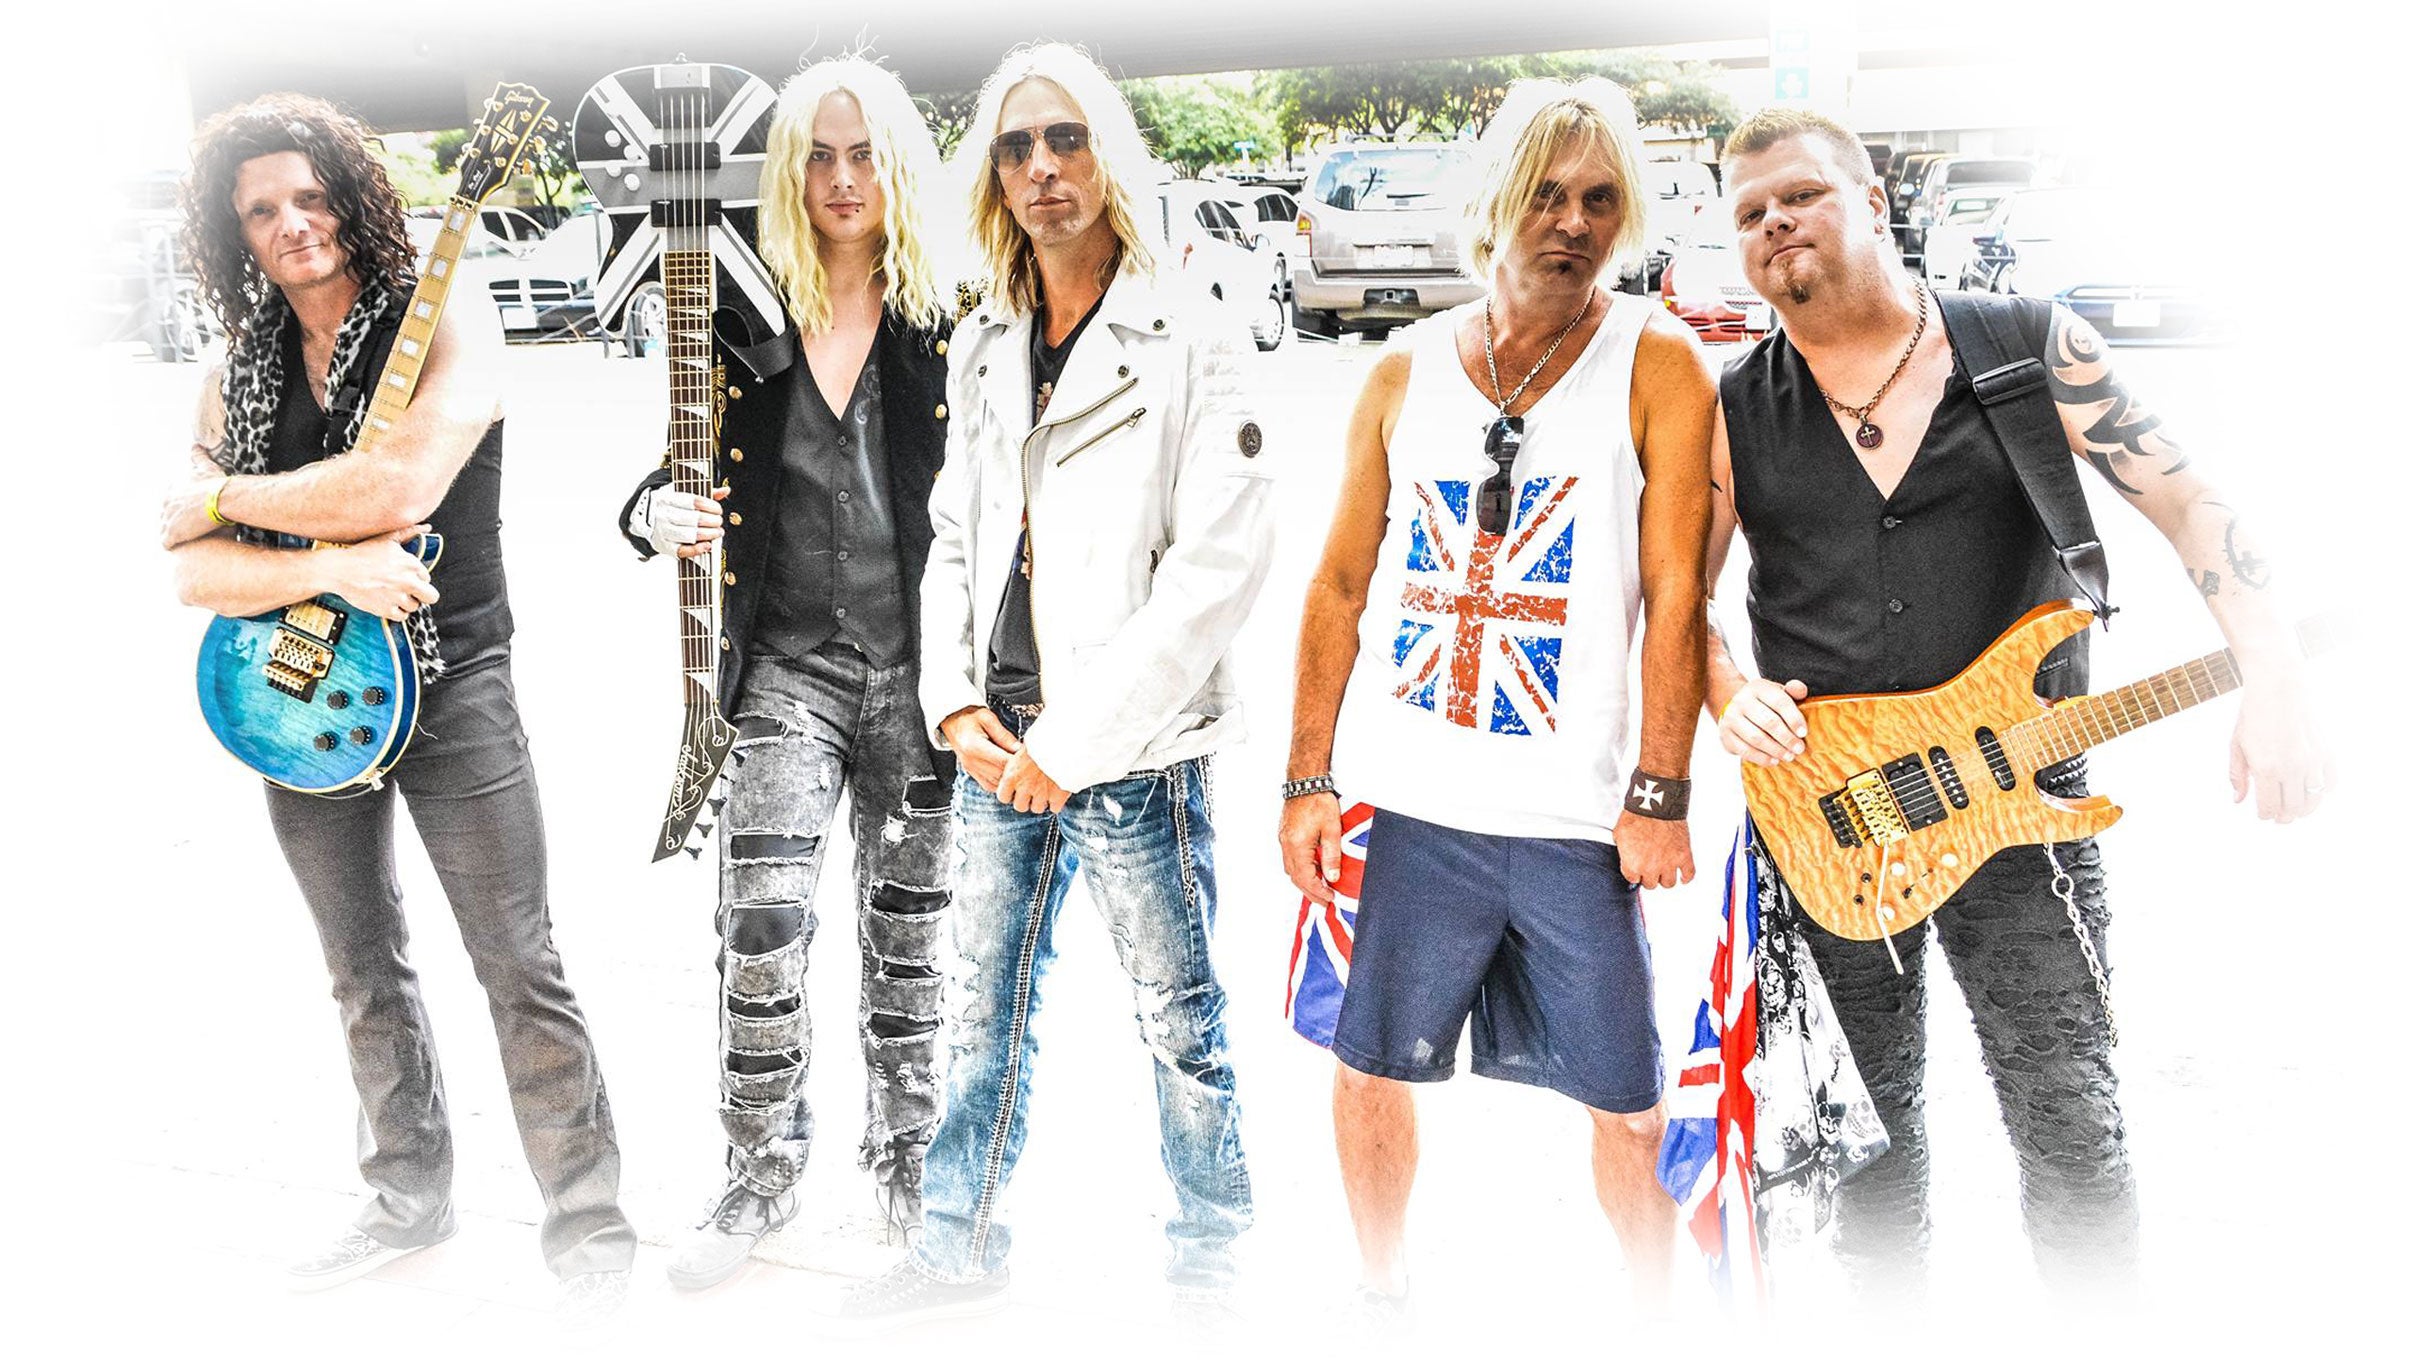 Def Leggend - The World's Greatest Tribute To Def Leppard presale password for concert tickets in Louisville, KY (Mercury Ballroom)